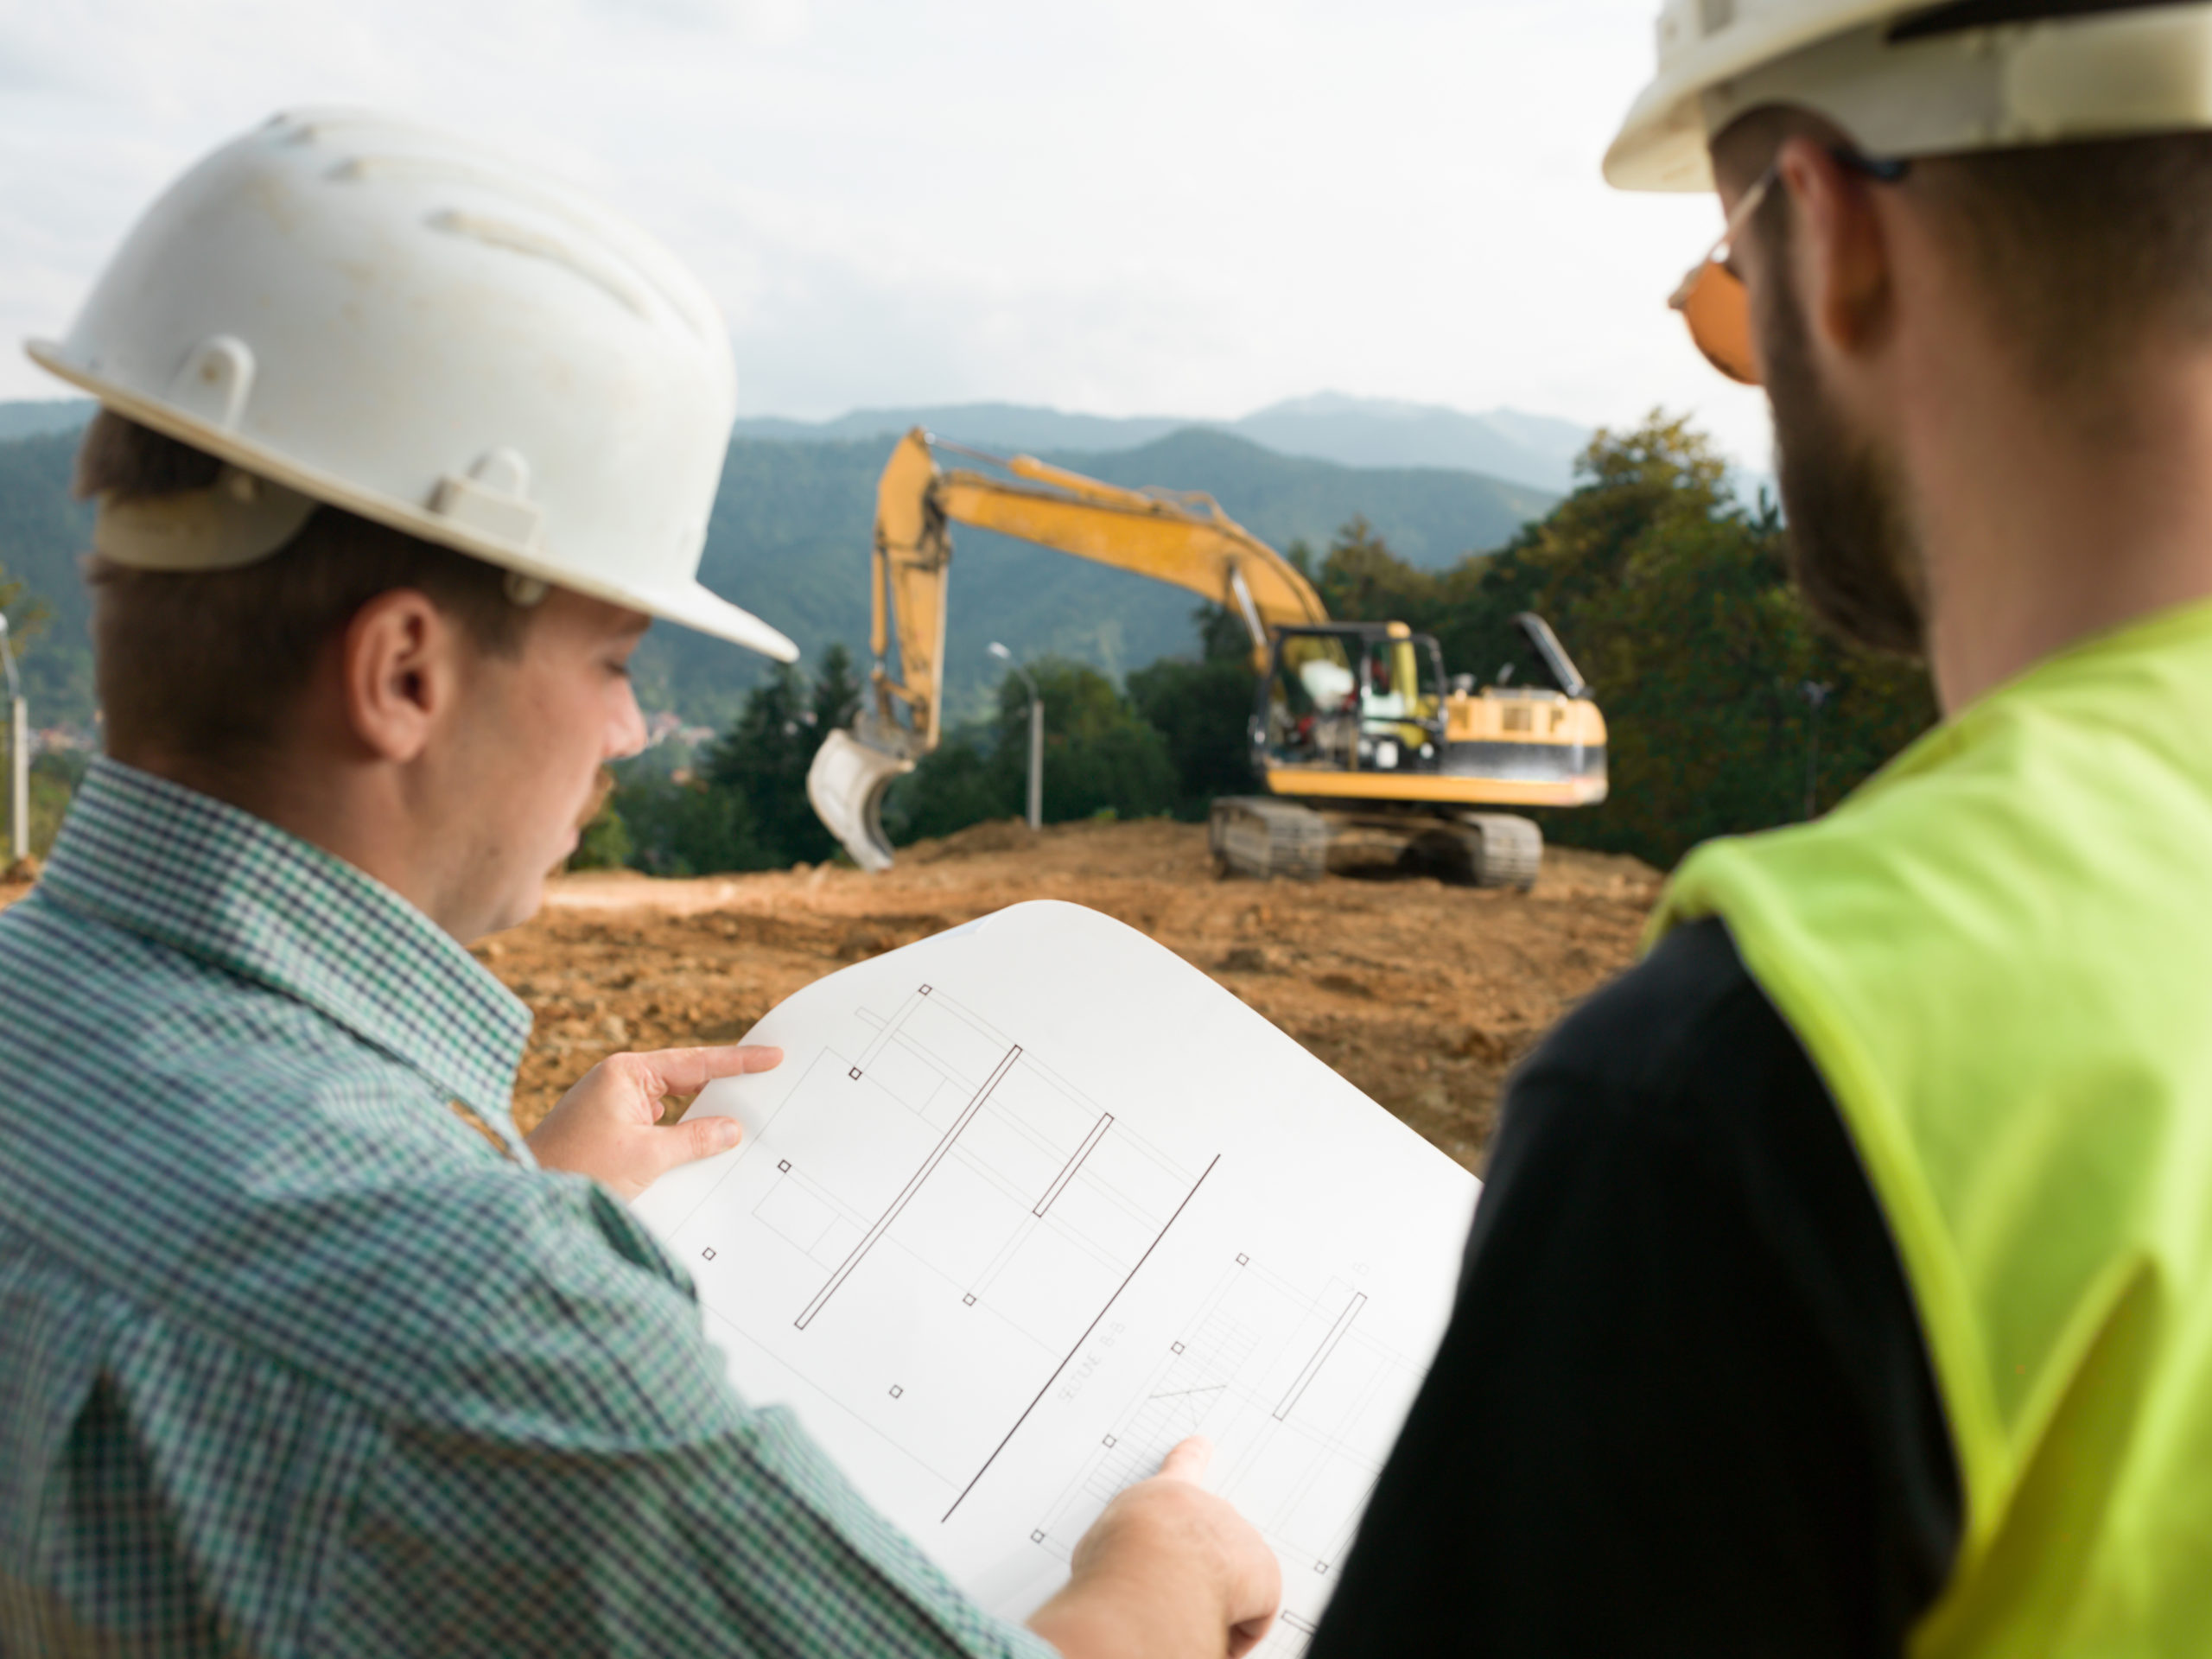 two men reviewing documents while construction is performed in distance